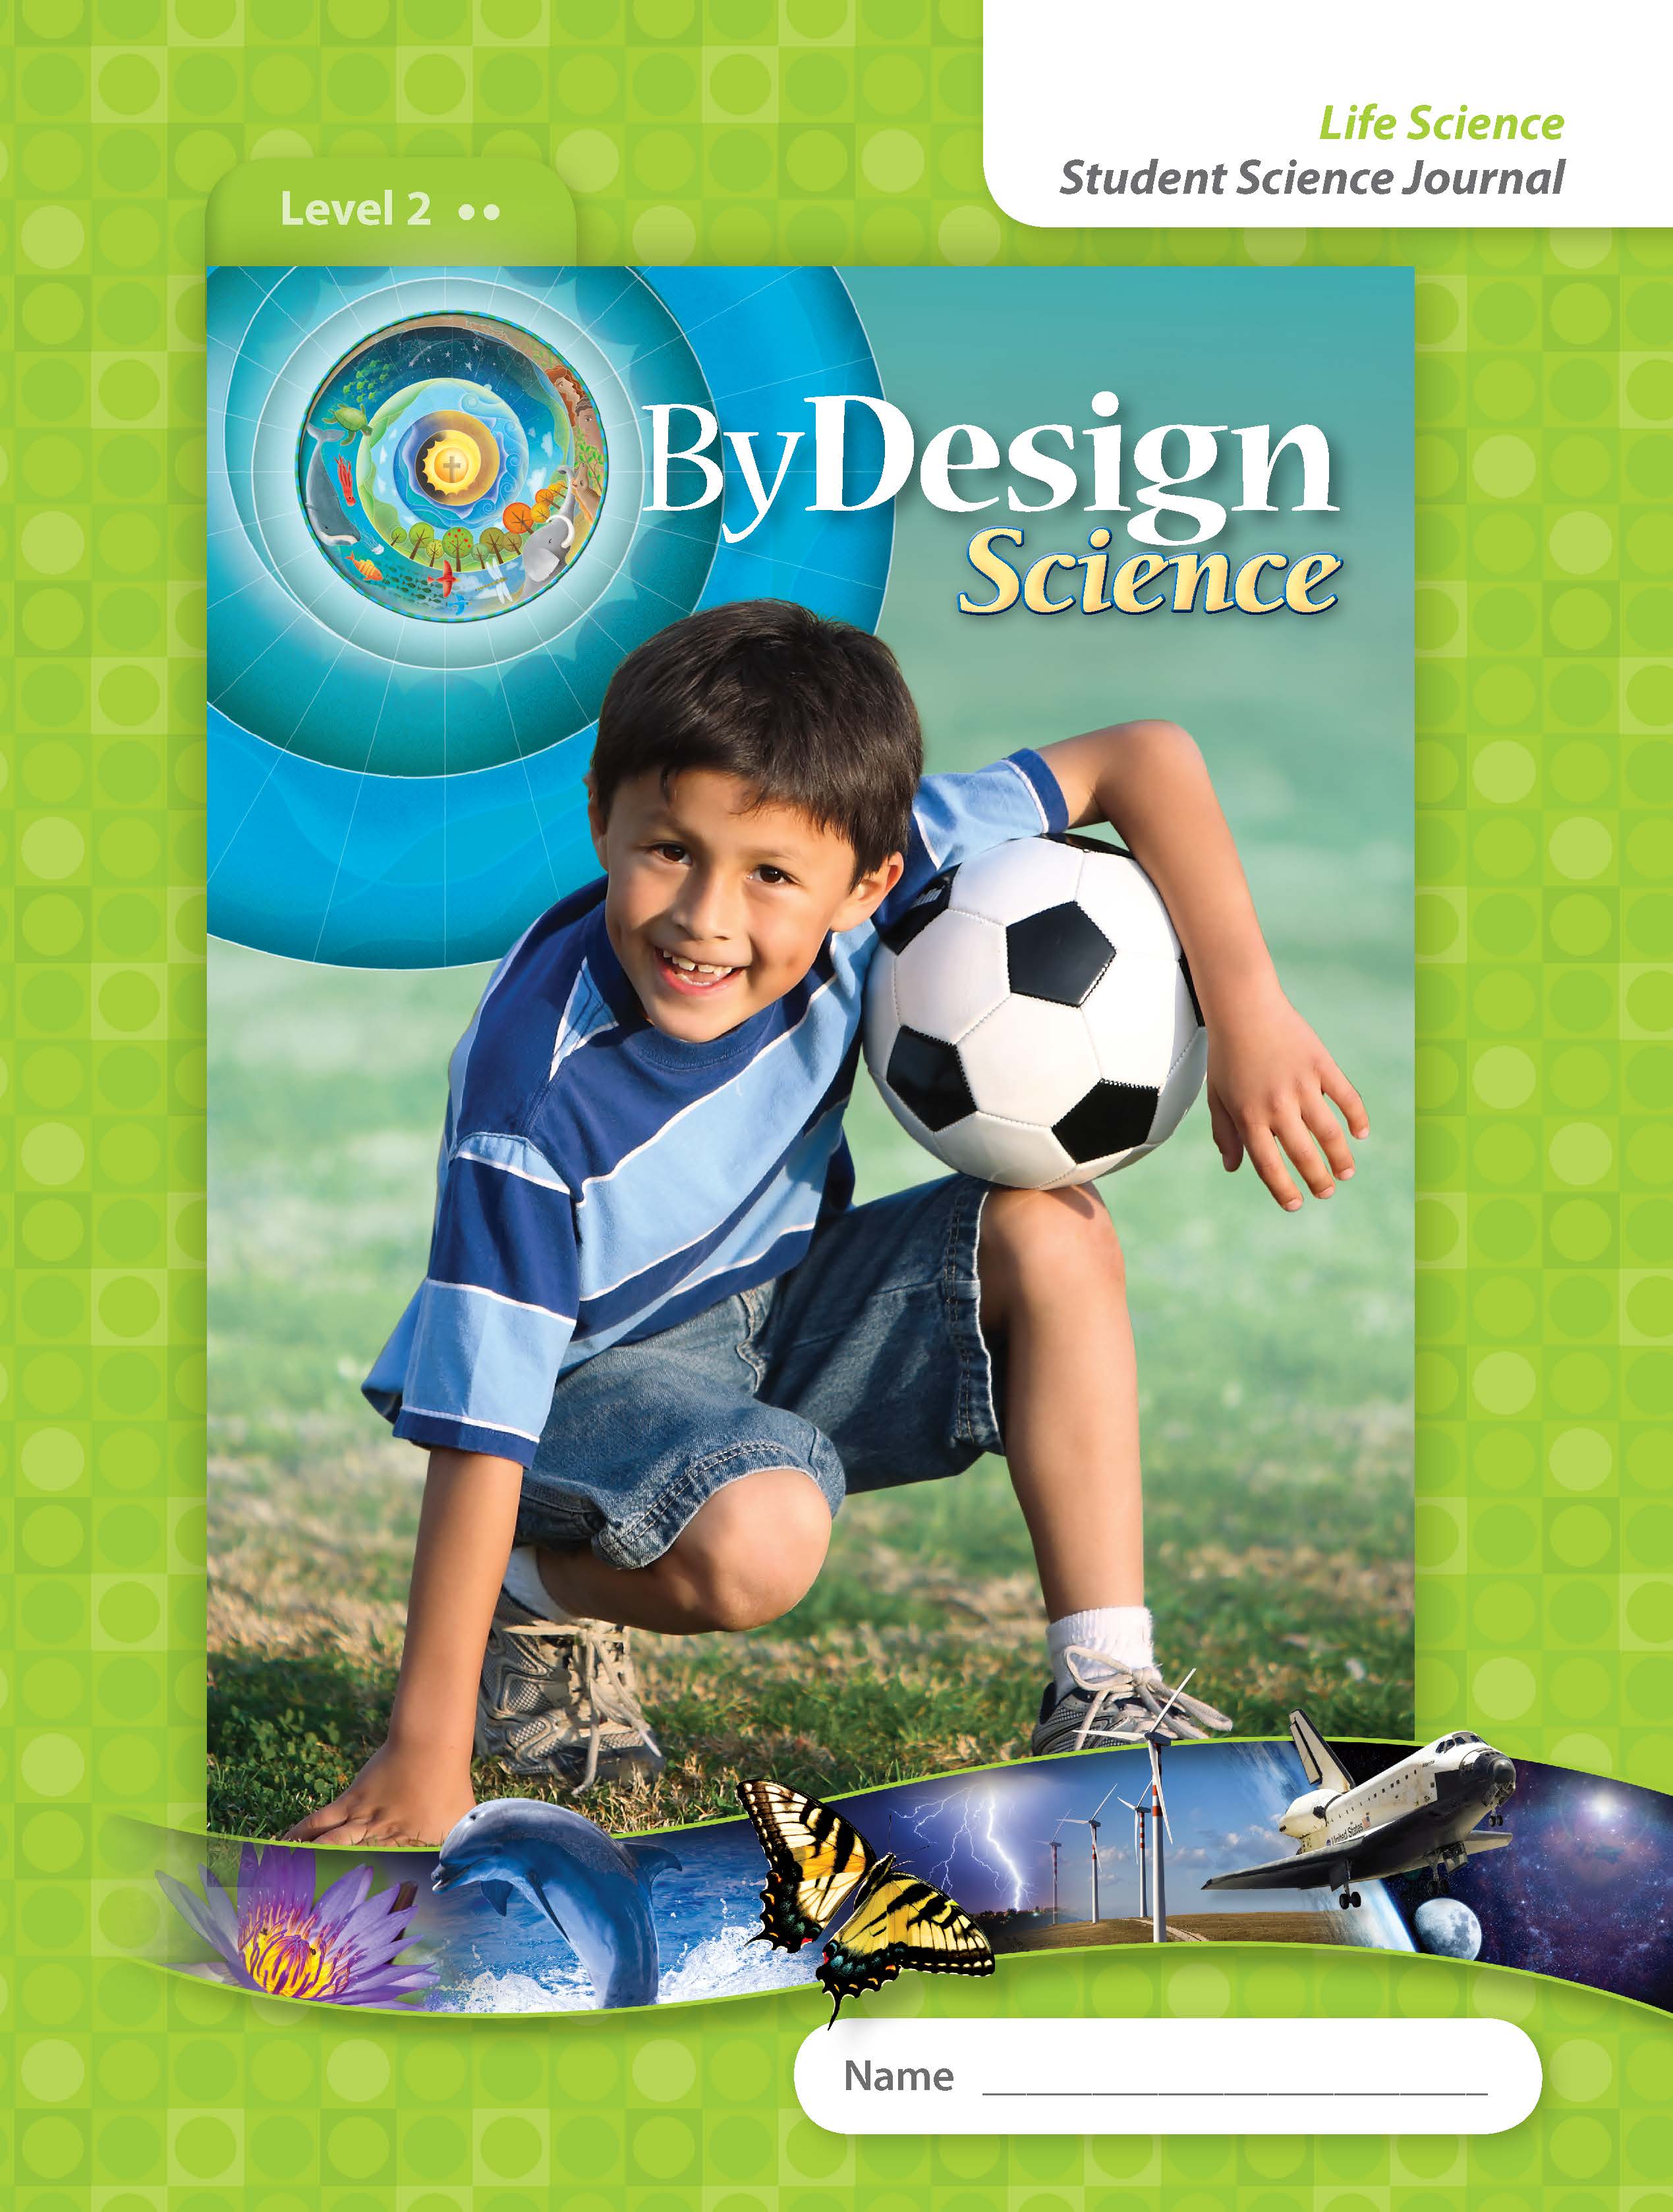 By Design Grade 2 Student Science Journal 1 Year License